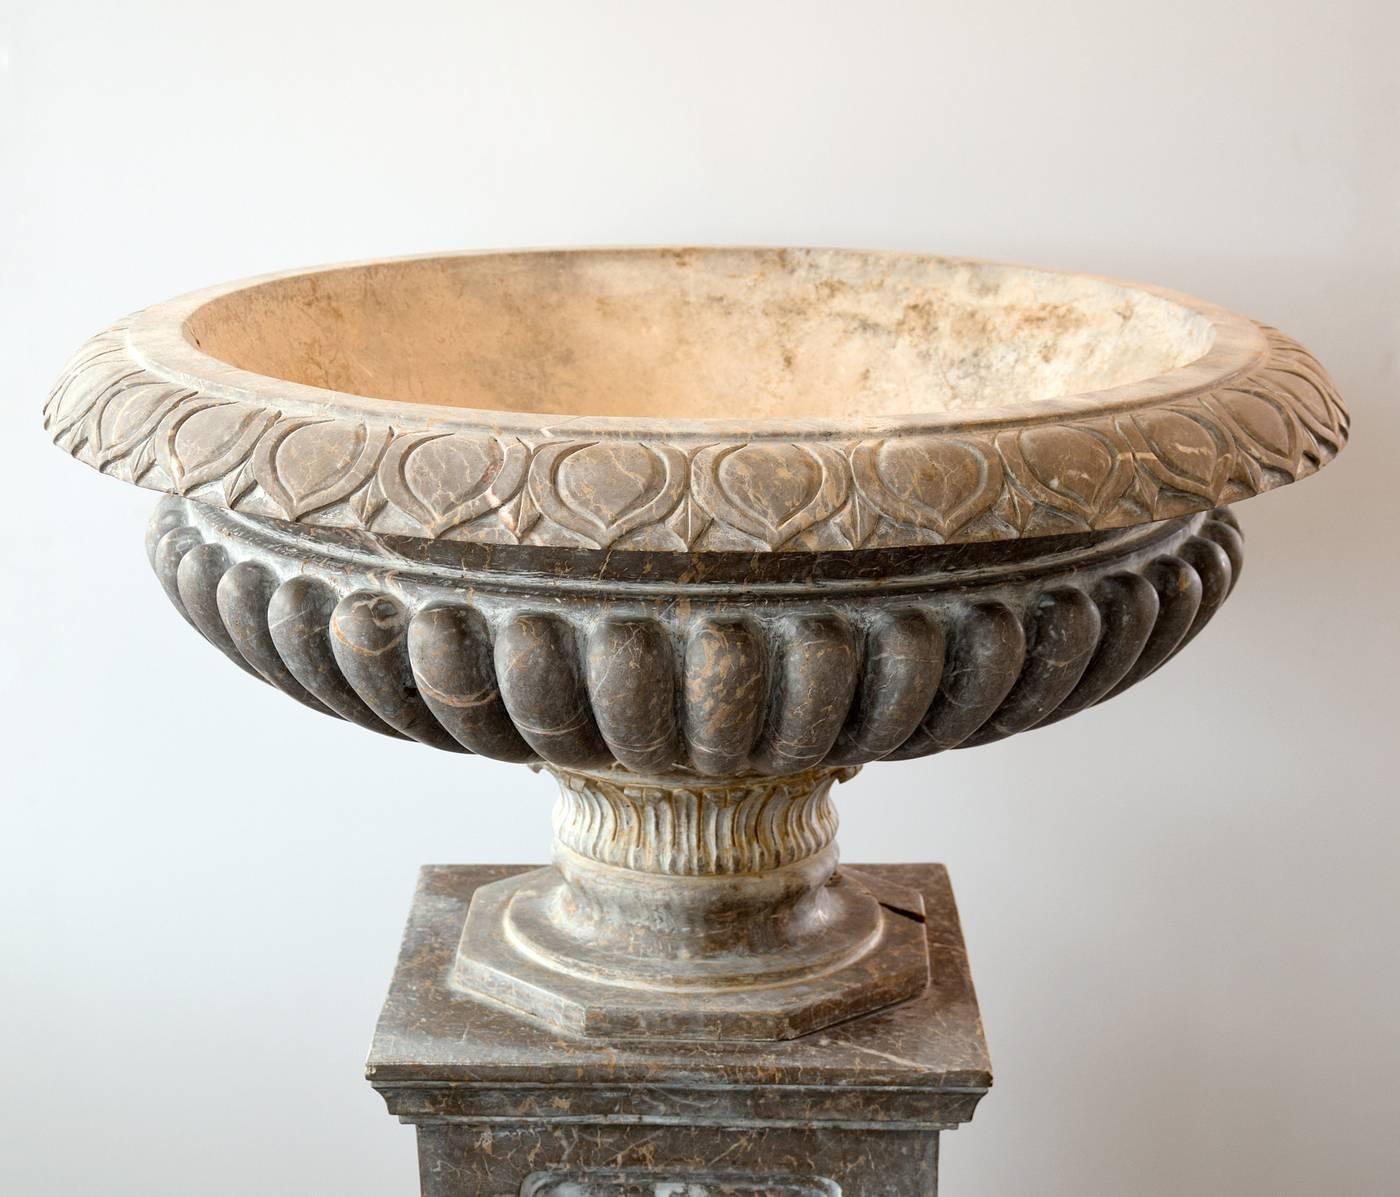 Hand-carved in Italy, this monumental brown marble planter measures 50